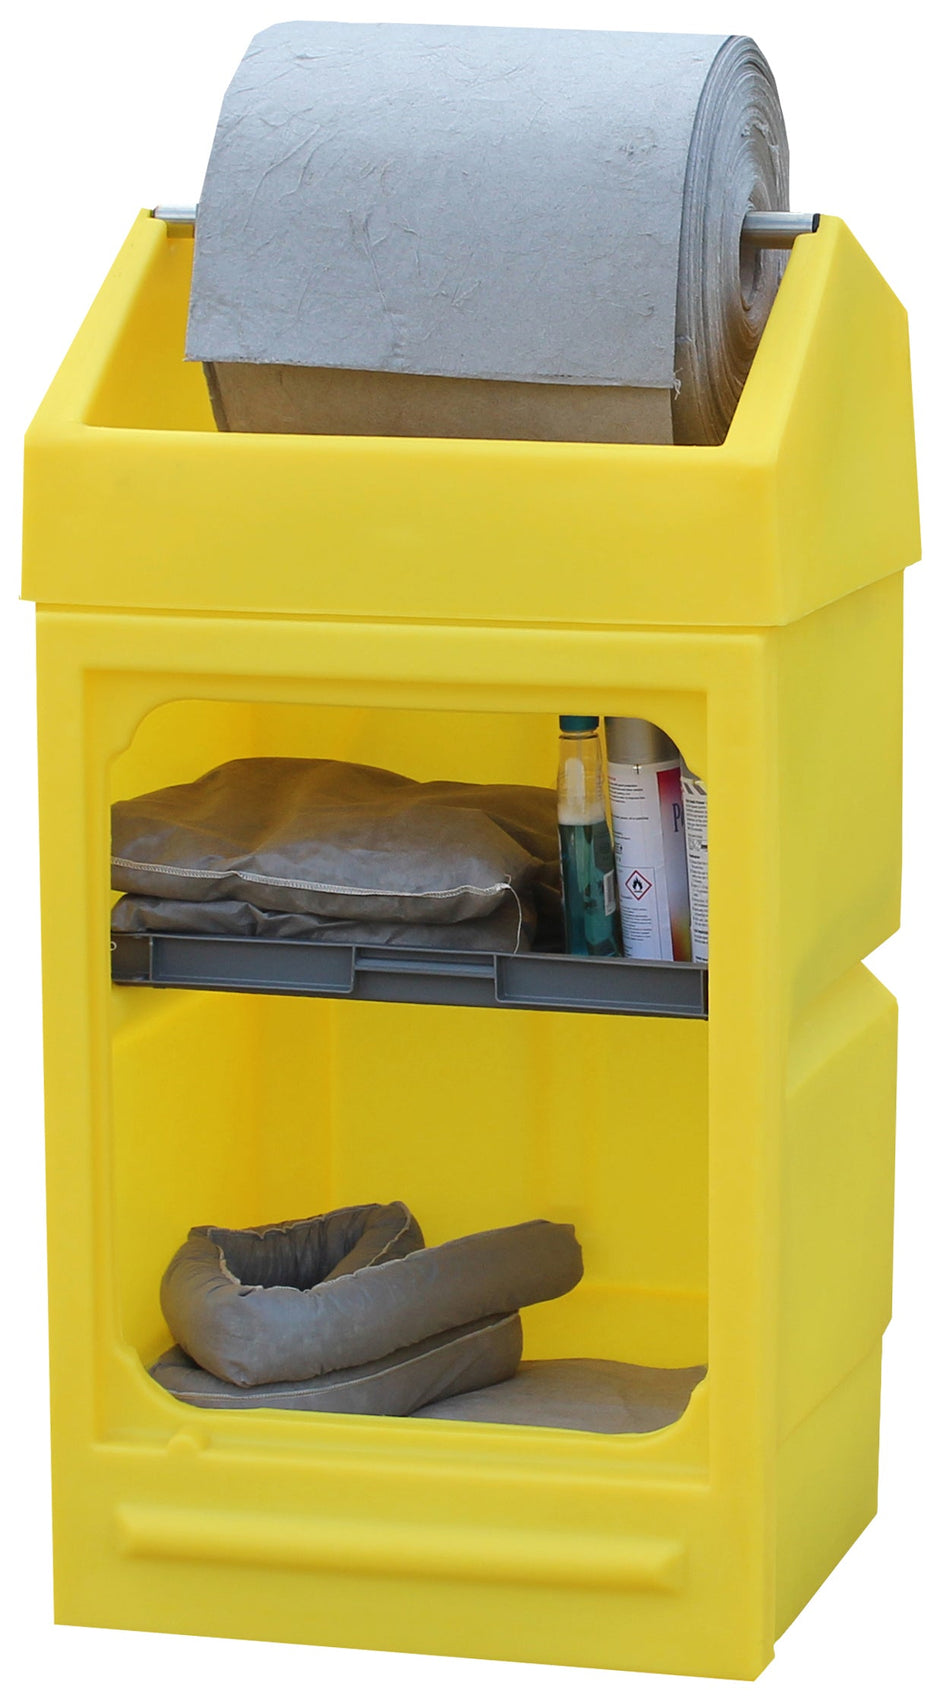 PDS Poly Dispensing Storage Cabinet with Removable Shelf, Roll Holder & Open Front - 980mm High Spill Cabinet > Coshh > Spill Containment > Spill Control > Romold > One Stop For Safety   